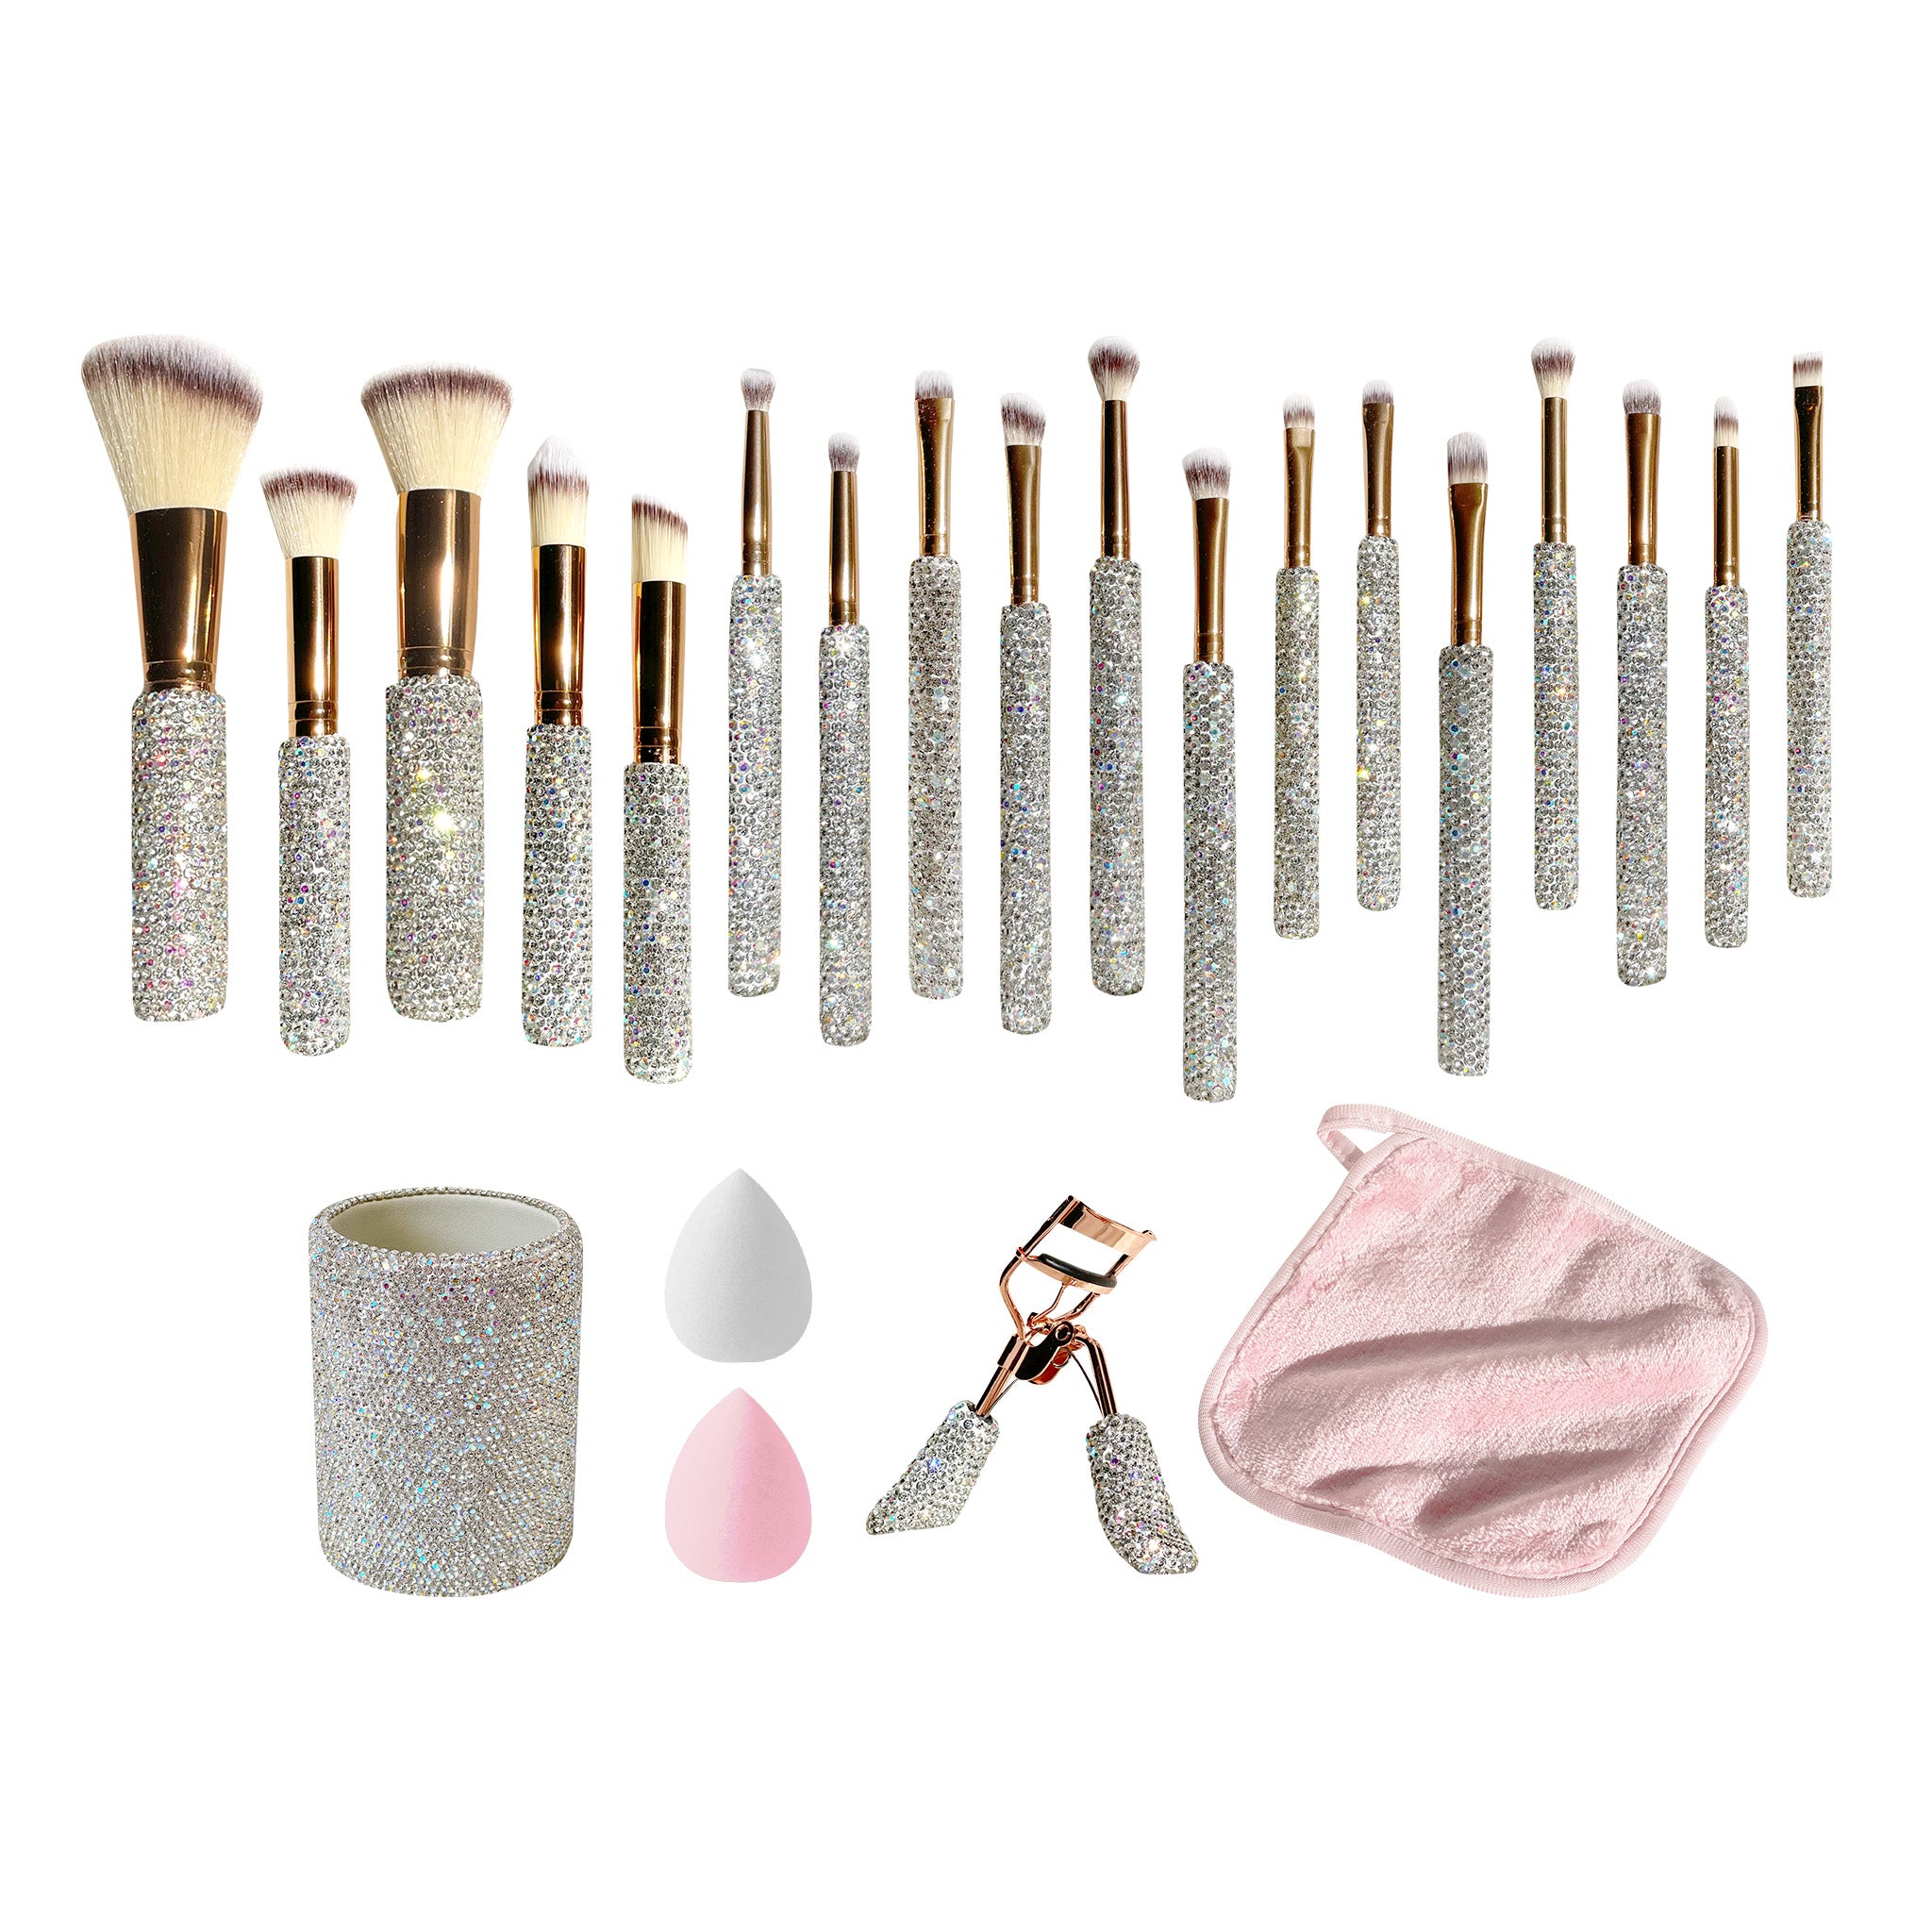 Collection of makeup products and brushes - Glamorous beauty